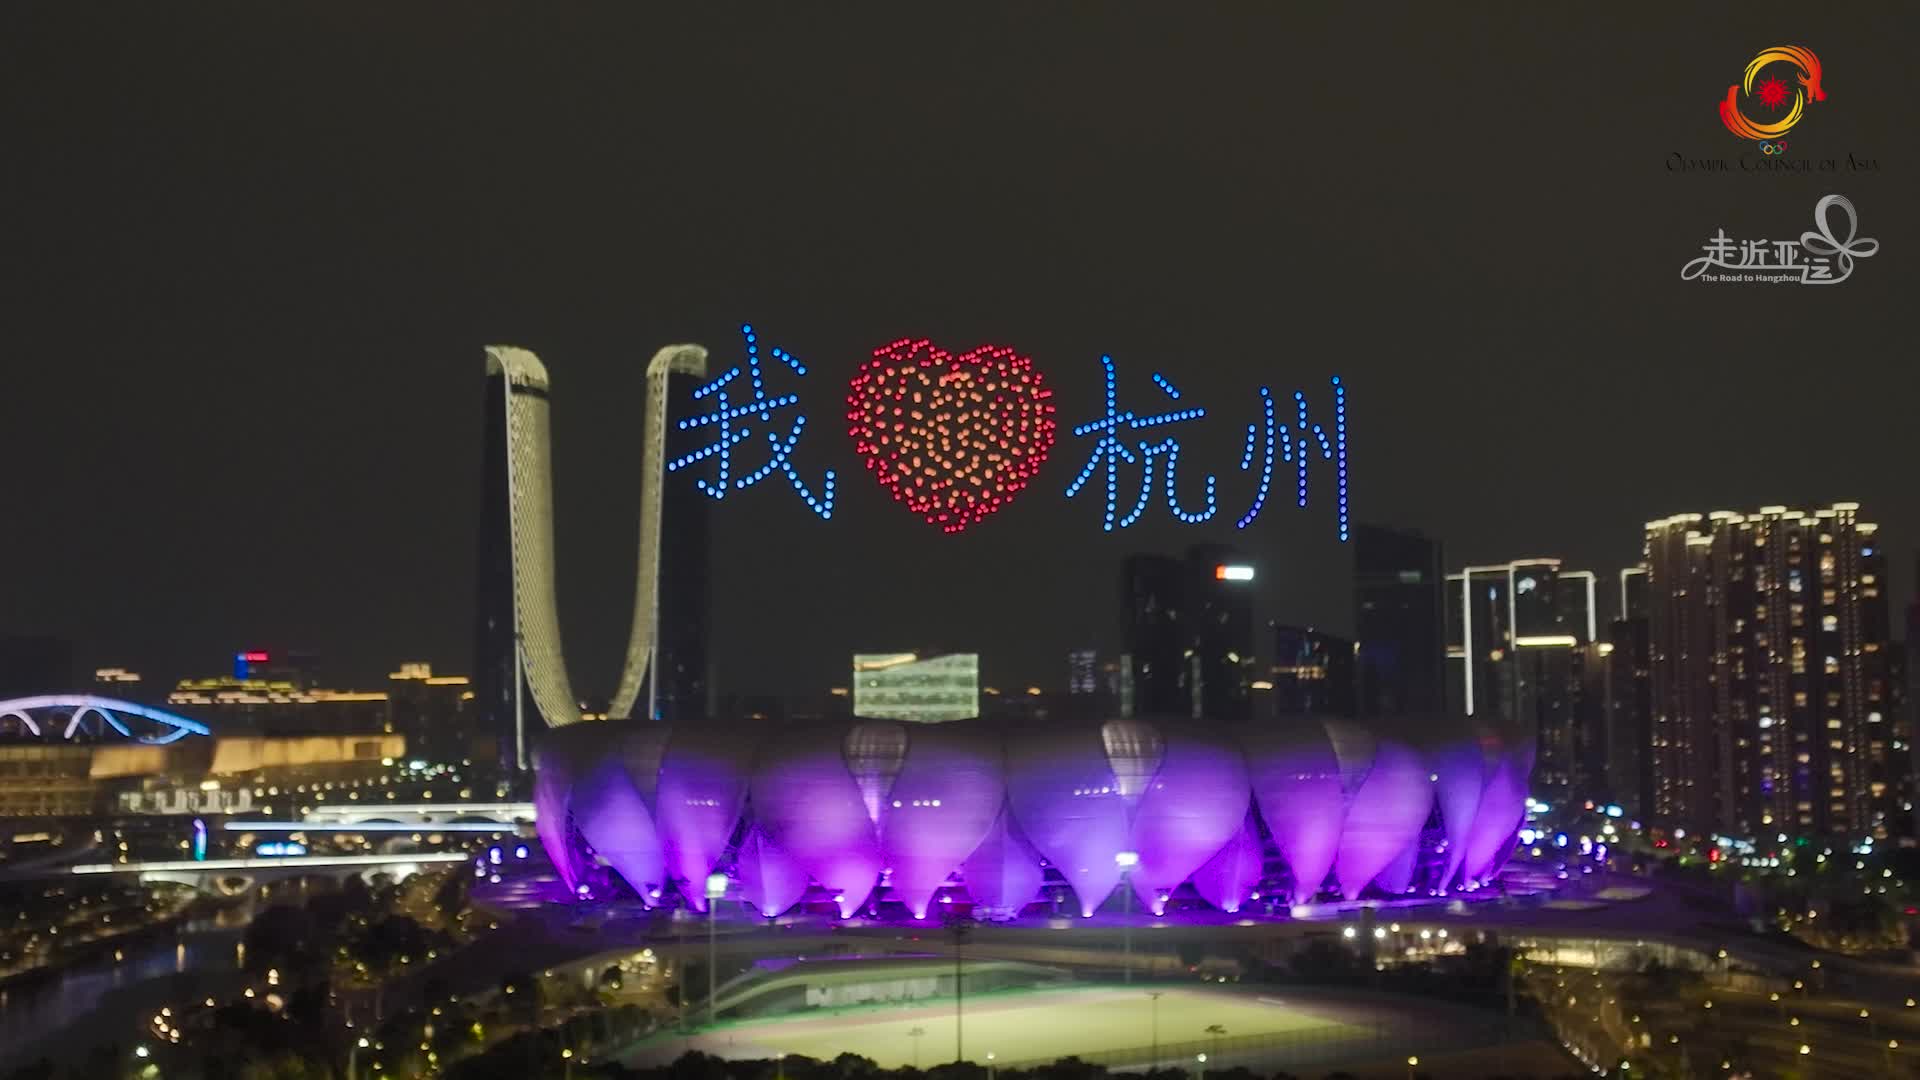 Fireworks show in Hangzhou lights up enthusiasm for 2023 Asian Games